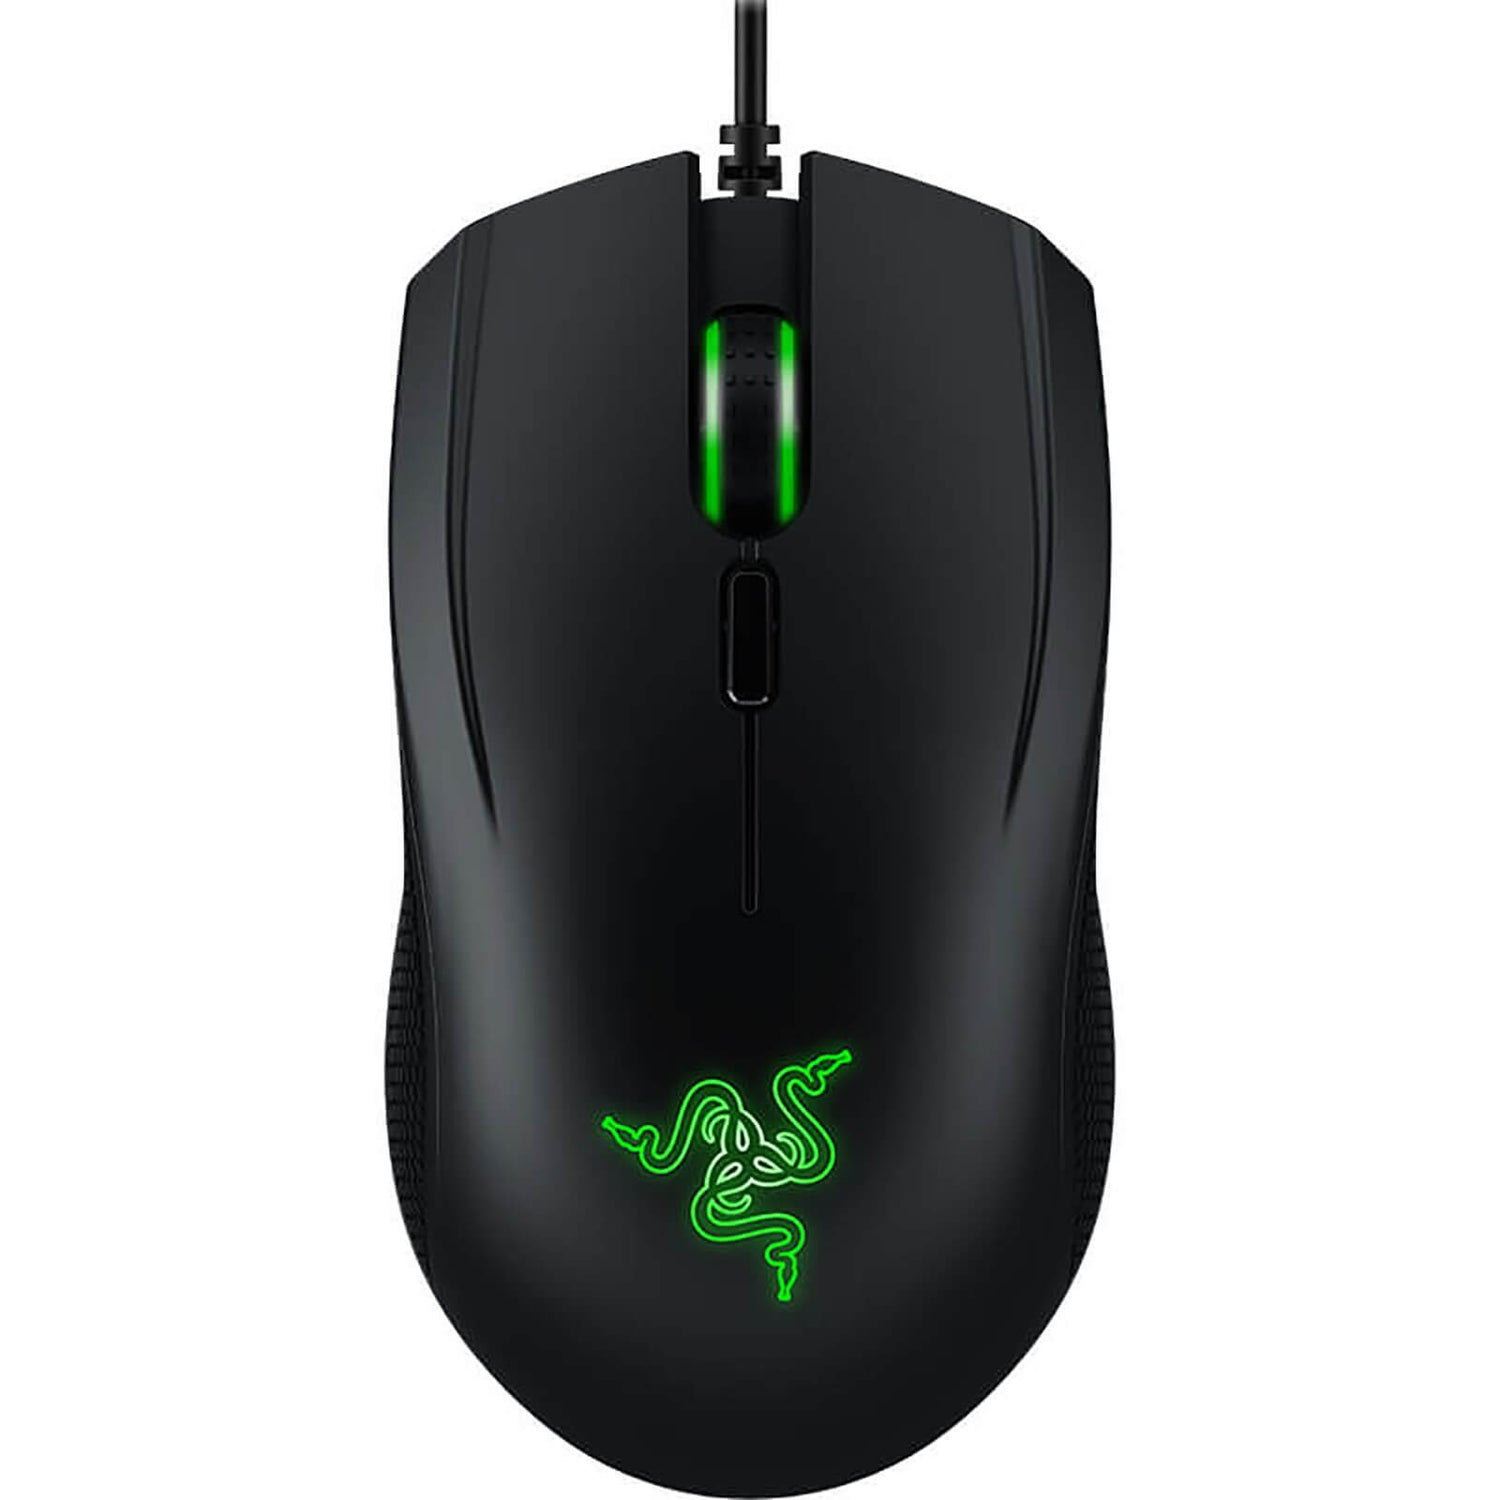 Razer Abyssus V2 Ambidextrous Gaming Mouse (2 Year Warranty)